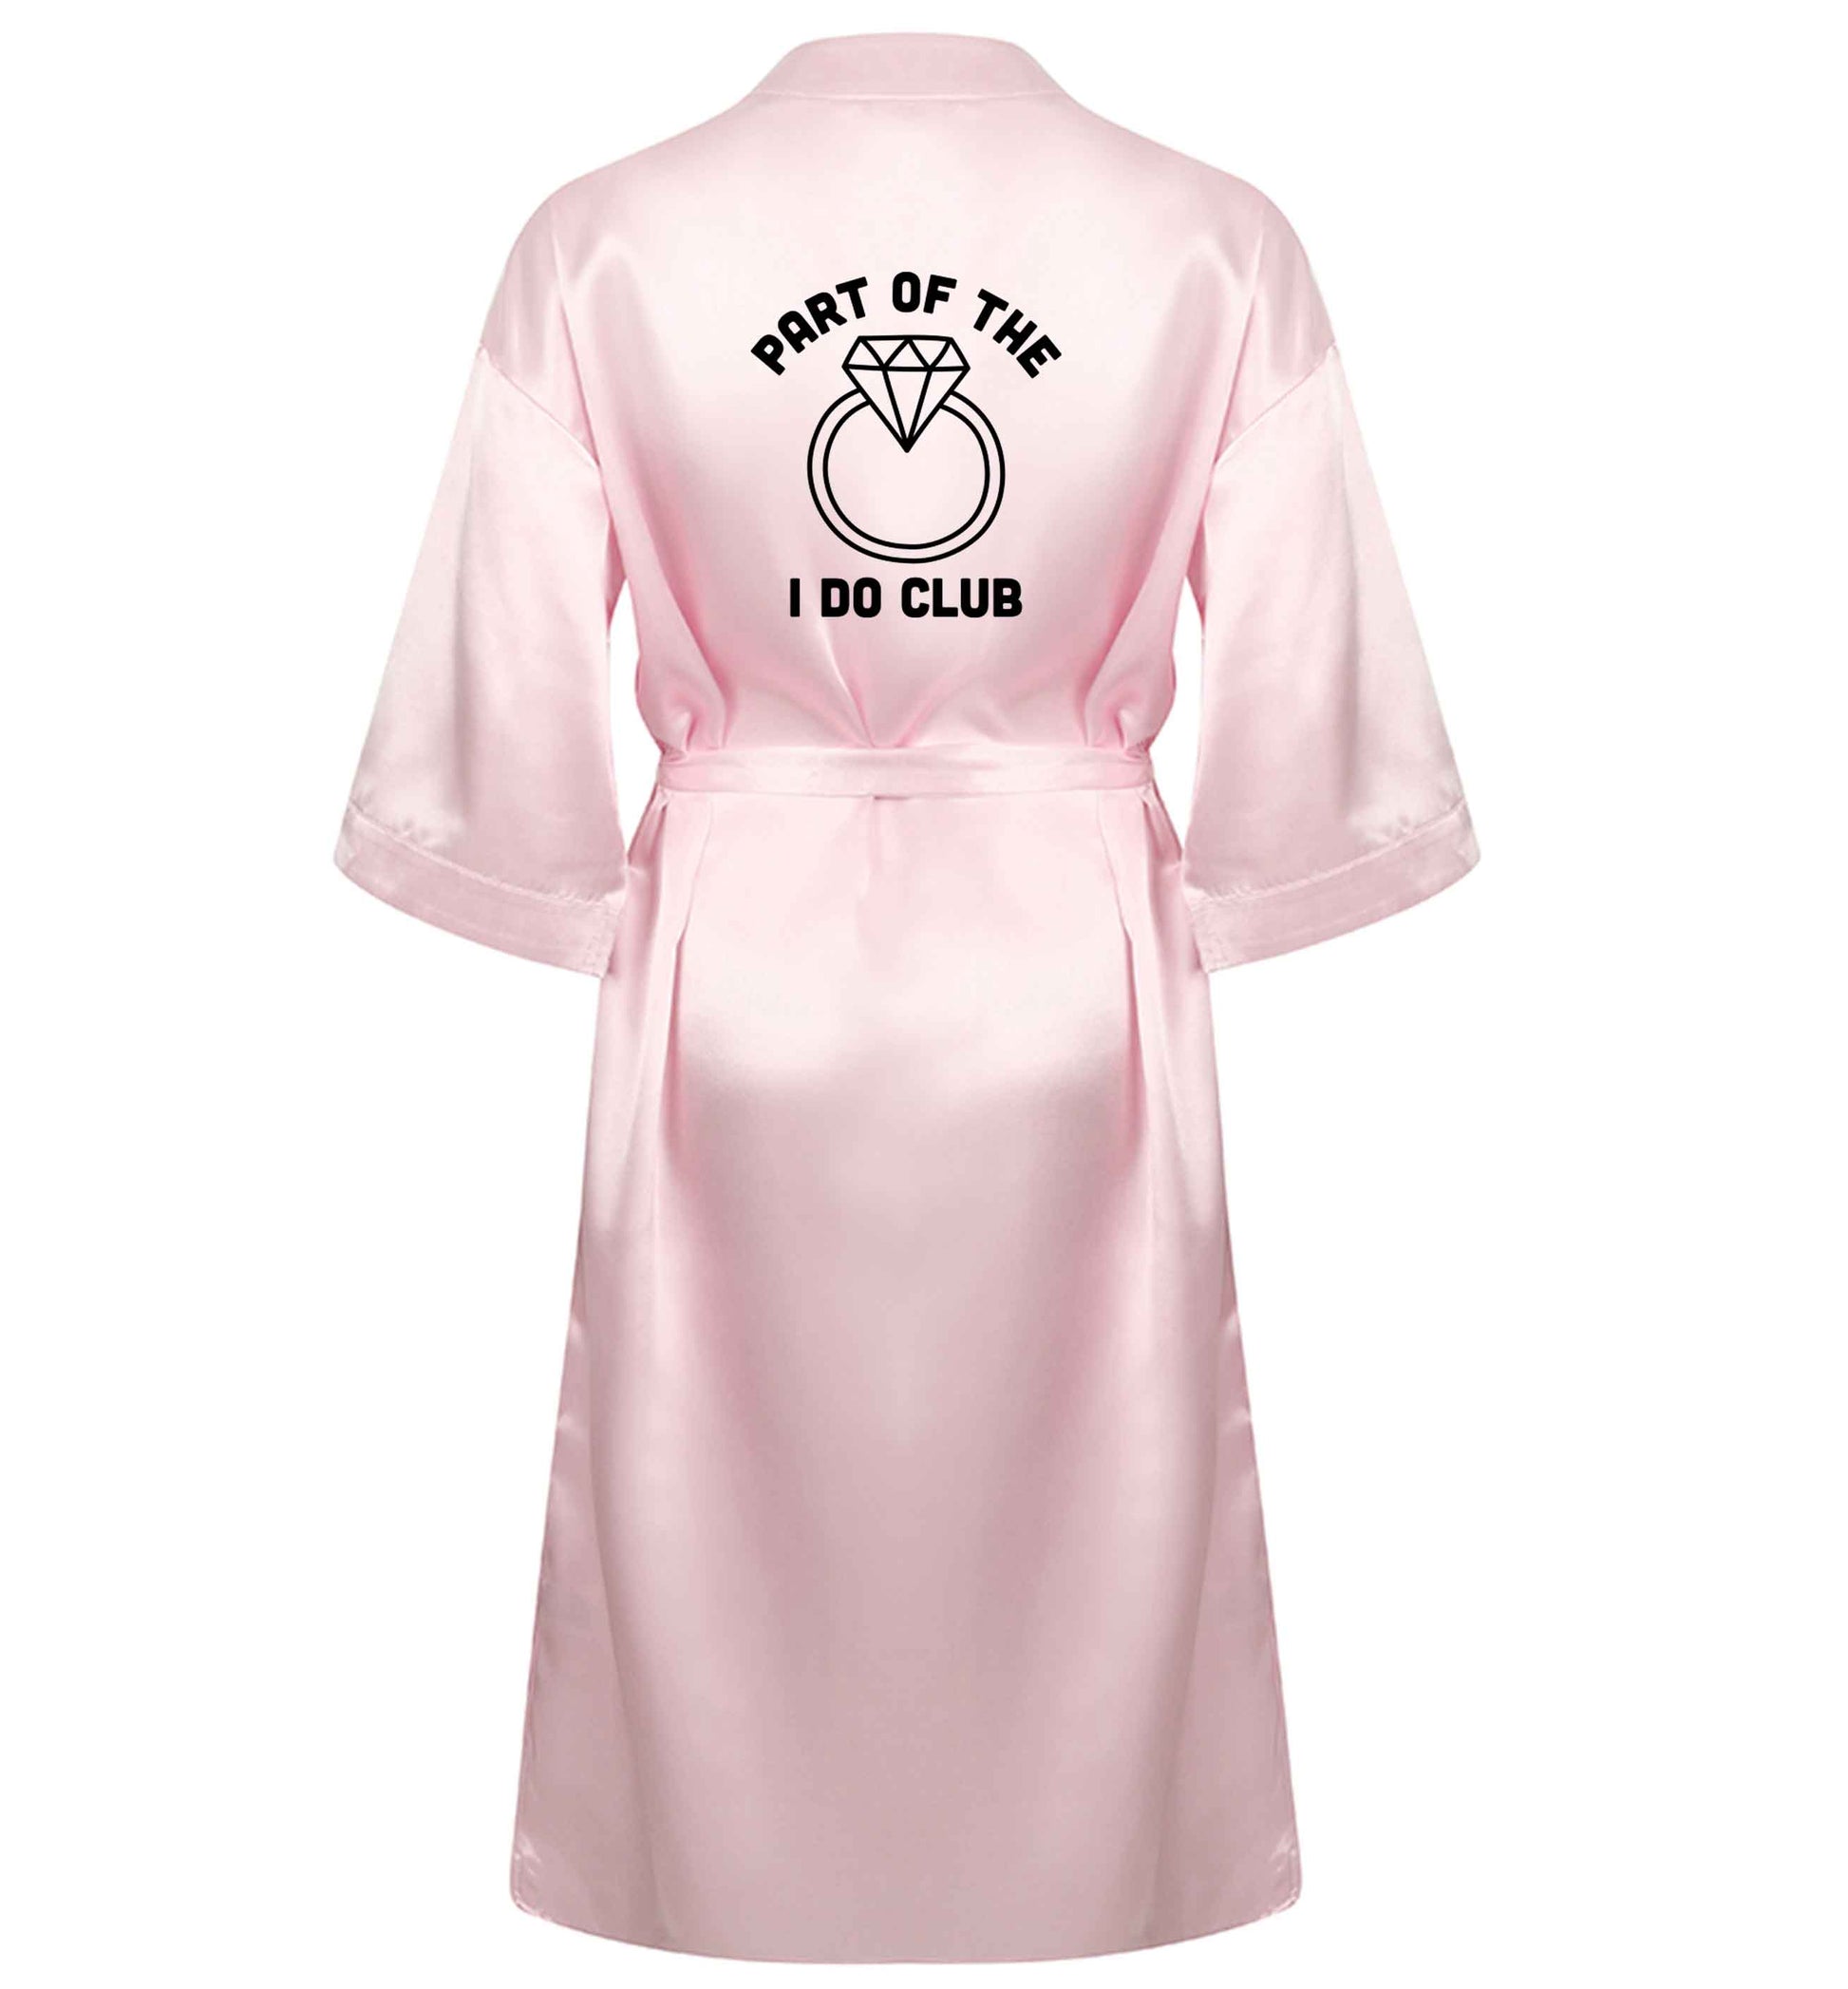 Part of the I do club XL/XXL pink  ladies dressing gown size 16/18